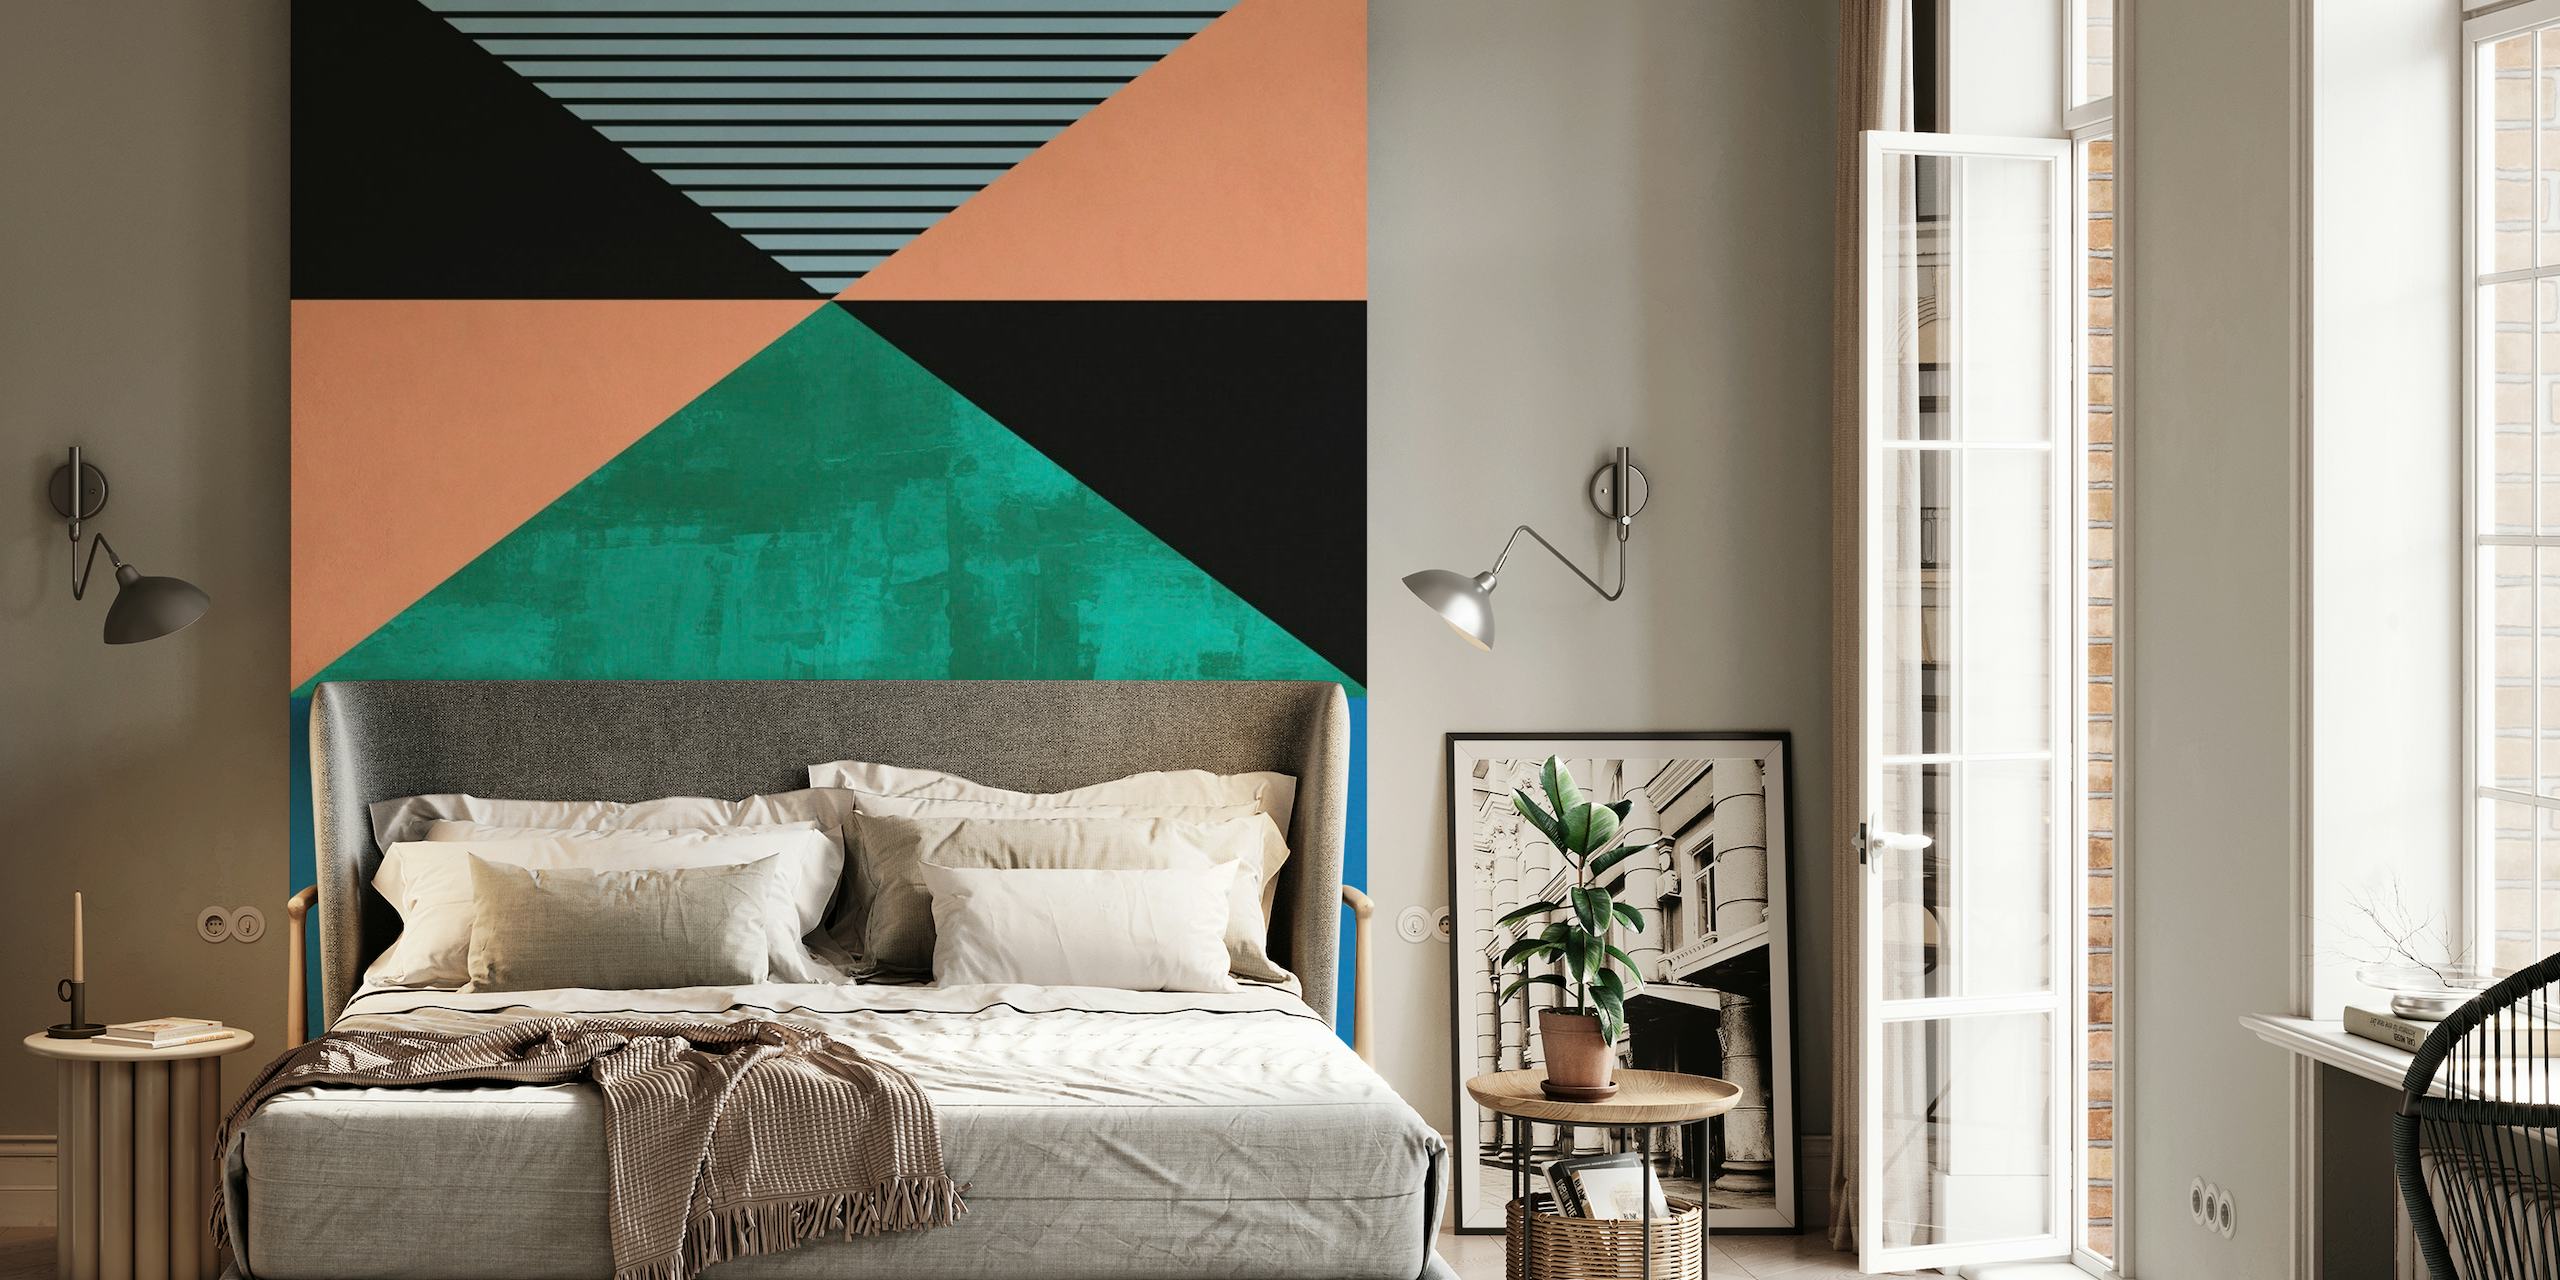 Abstract geometric wall mural with teal, black, coral triangles and stripes